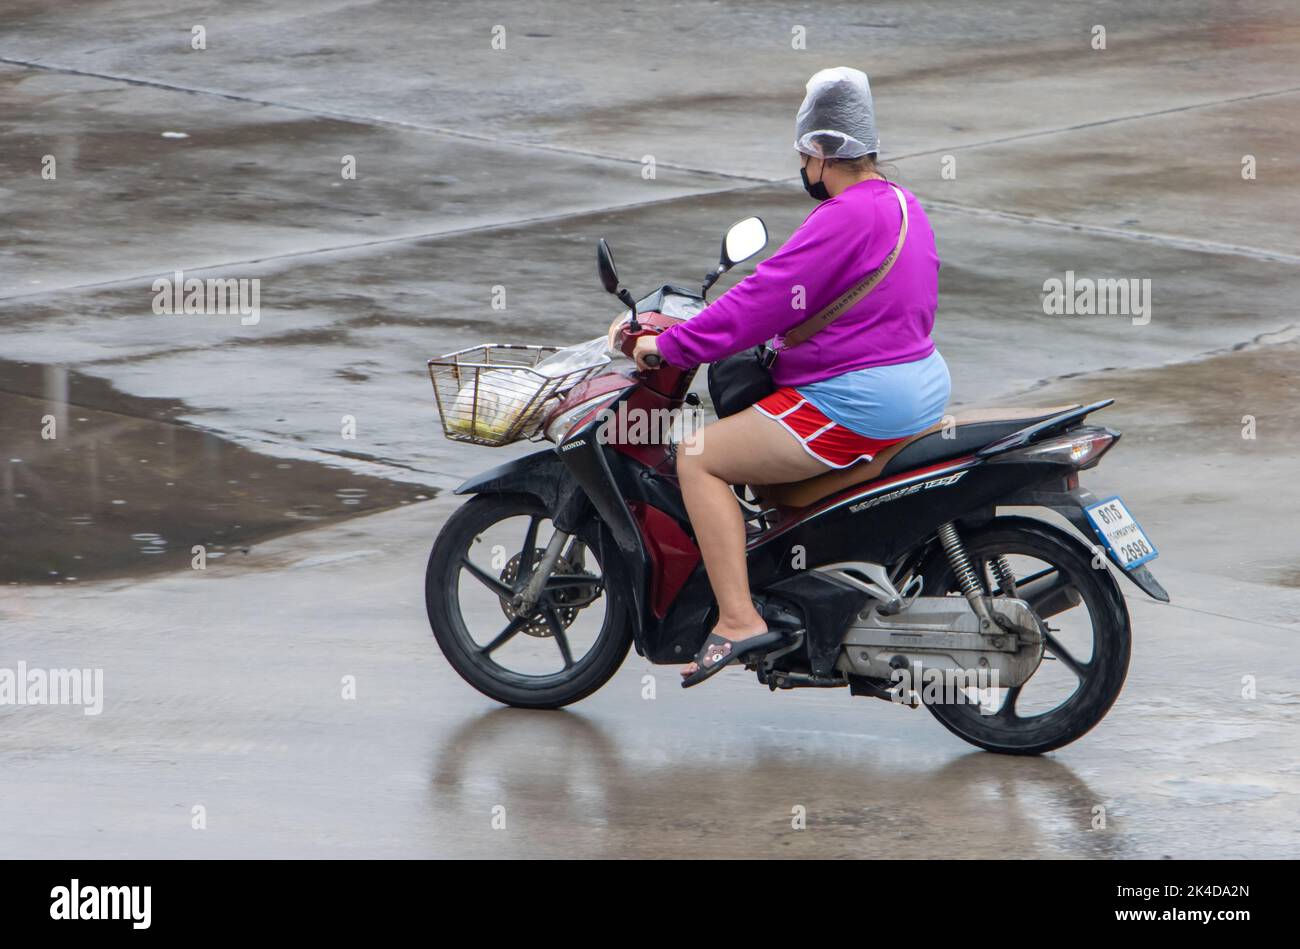 SAMUT PRAKAN, THAILAND, SEP 26 2022, A woman rides a motorcycle with a plastic bag on her head to protect from the rain Stock Photo